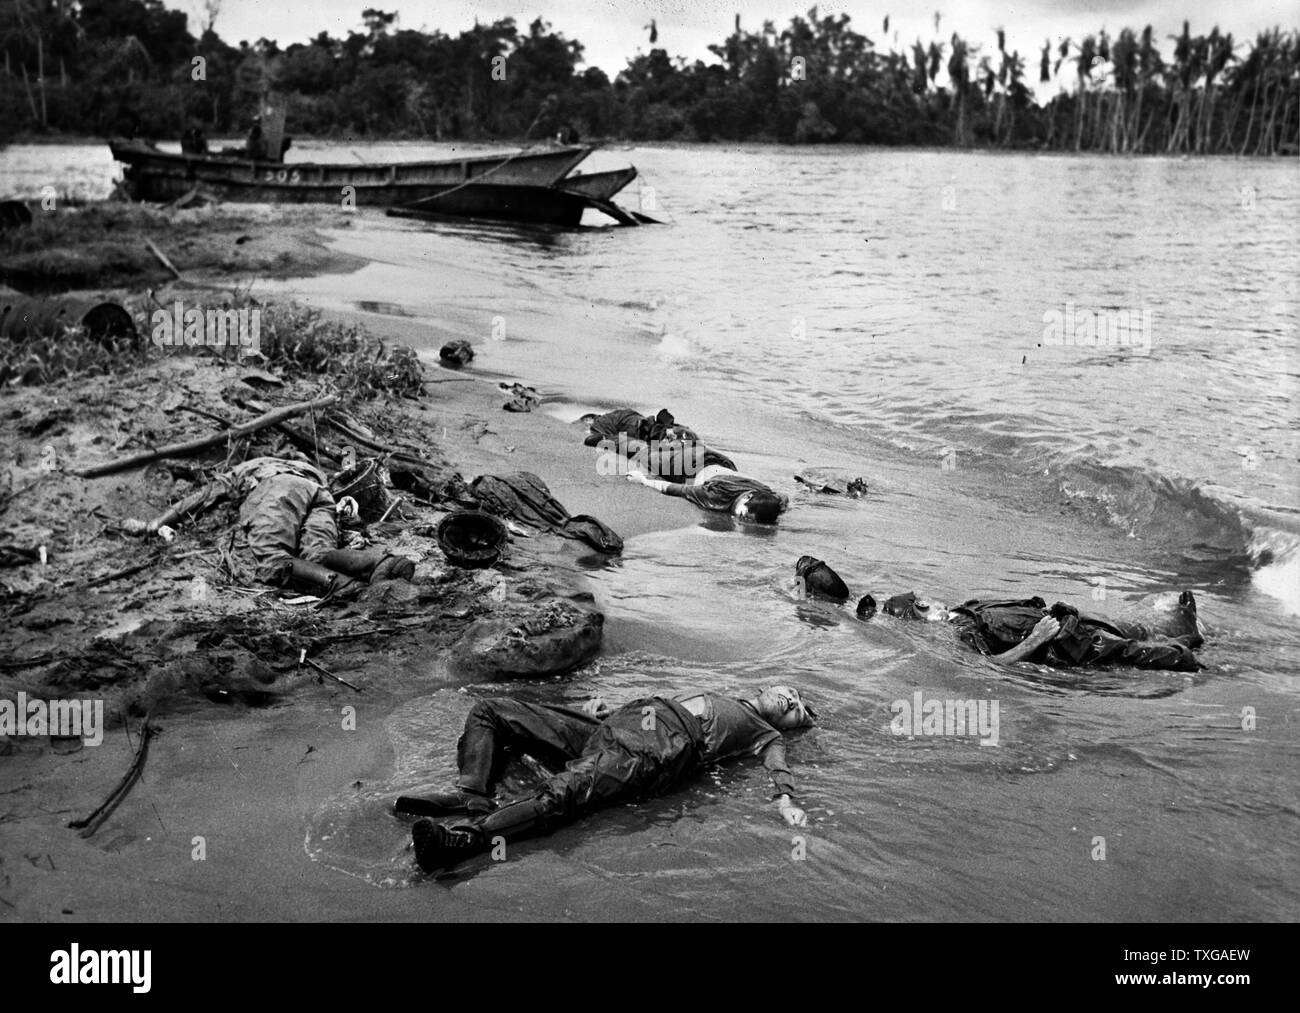 U.S. forces inflict heavy casualties on the Japanese in capture of Buna, New Guinea. On the beach of Buna Mission, last point of Japanese resistance in the Papuan section of New Guinea, the bodies of slain Japanese soldiers lie a few steps from their shattered landing boat. The Japanese suffered heavy losses in this engagement and eventually were completely routed by American and Australian forces Stock Photo